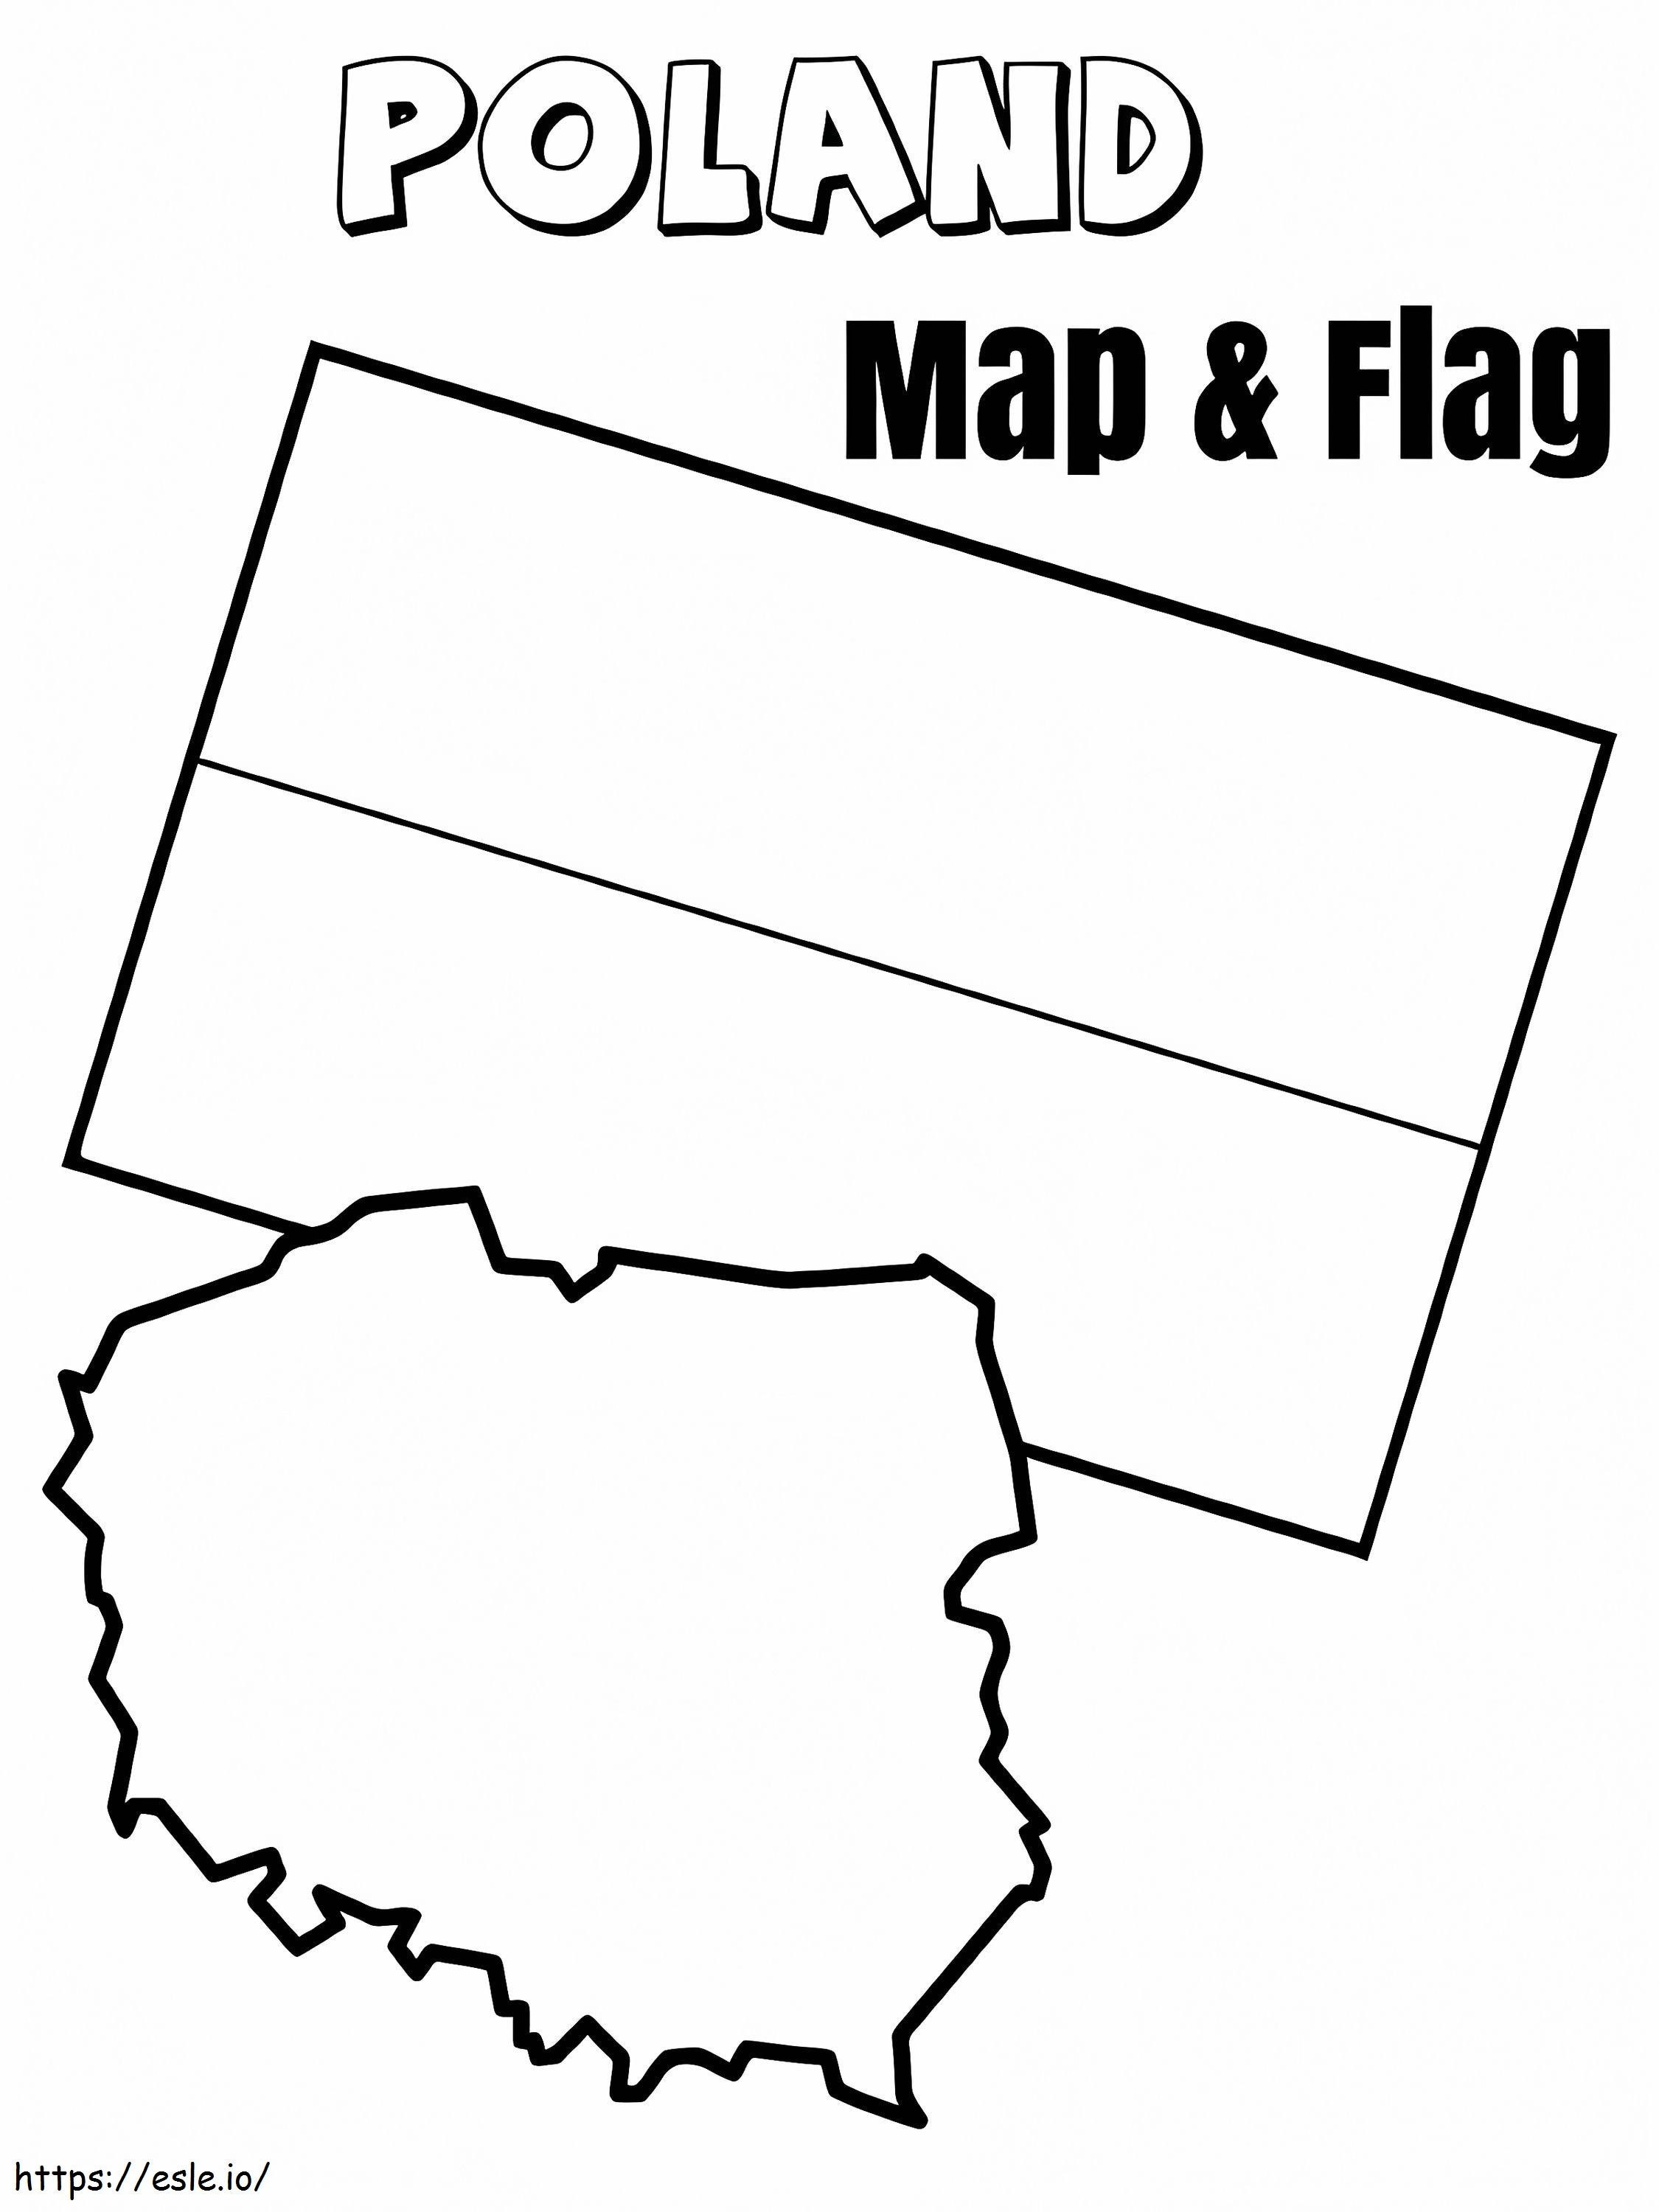 Poland Flag And Map coloring page